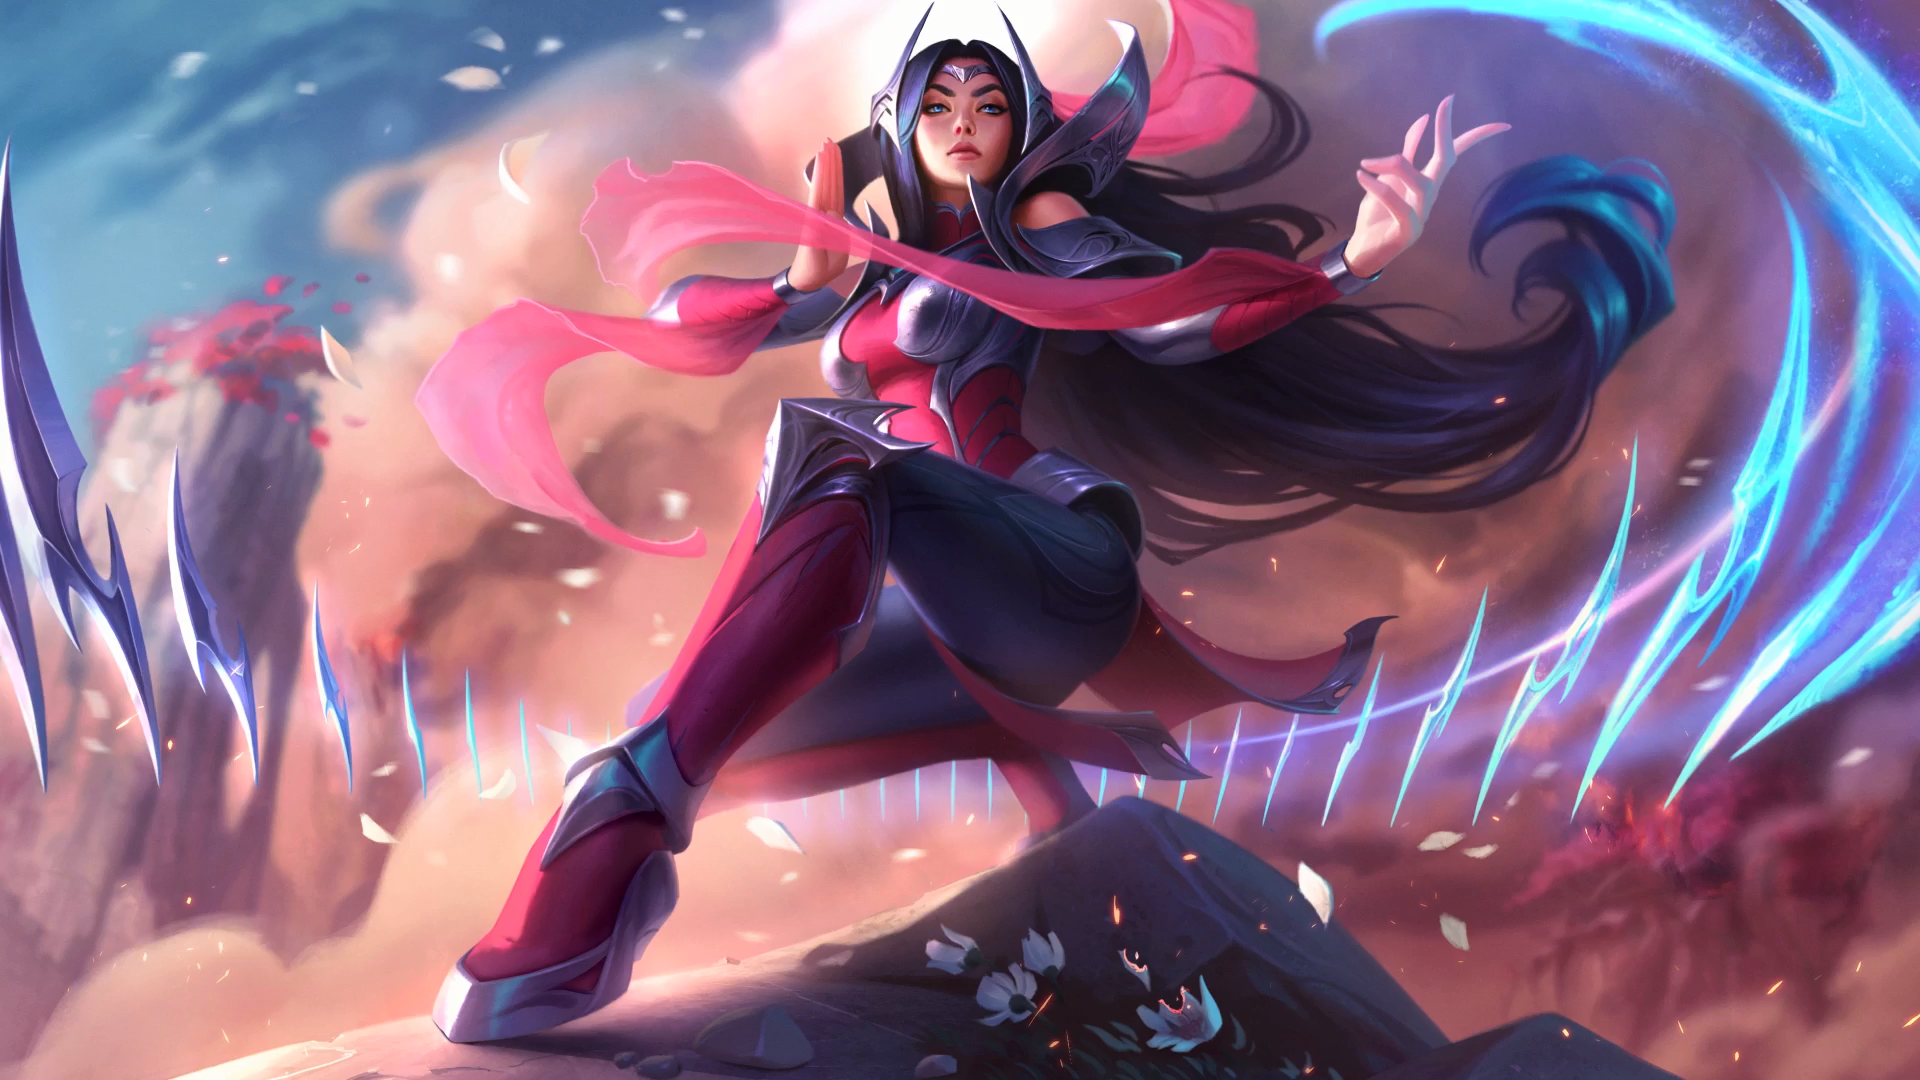 Irelia S New Splash Art And Log In Music Teased Ahead Of Official